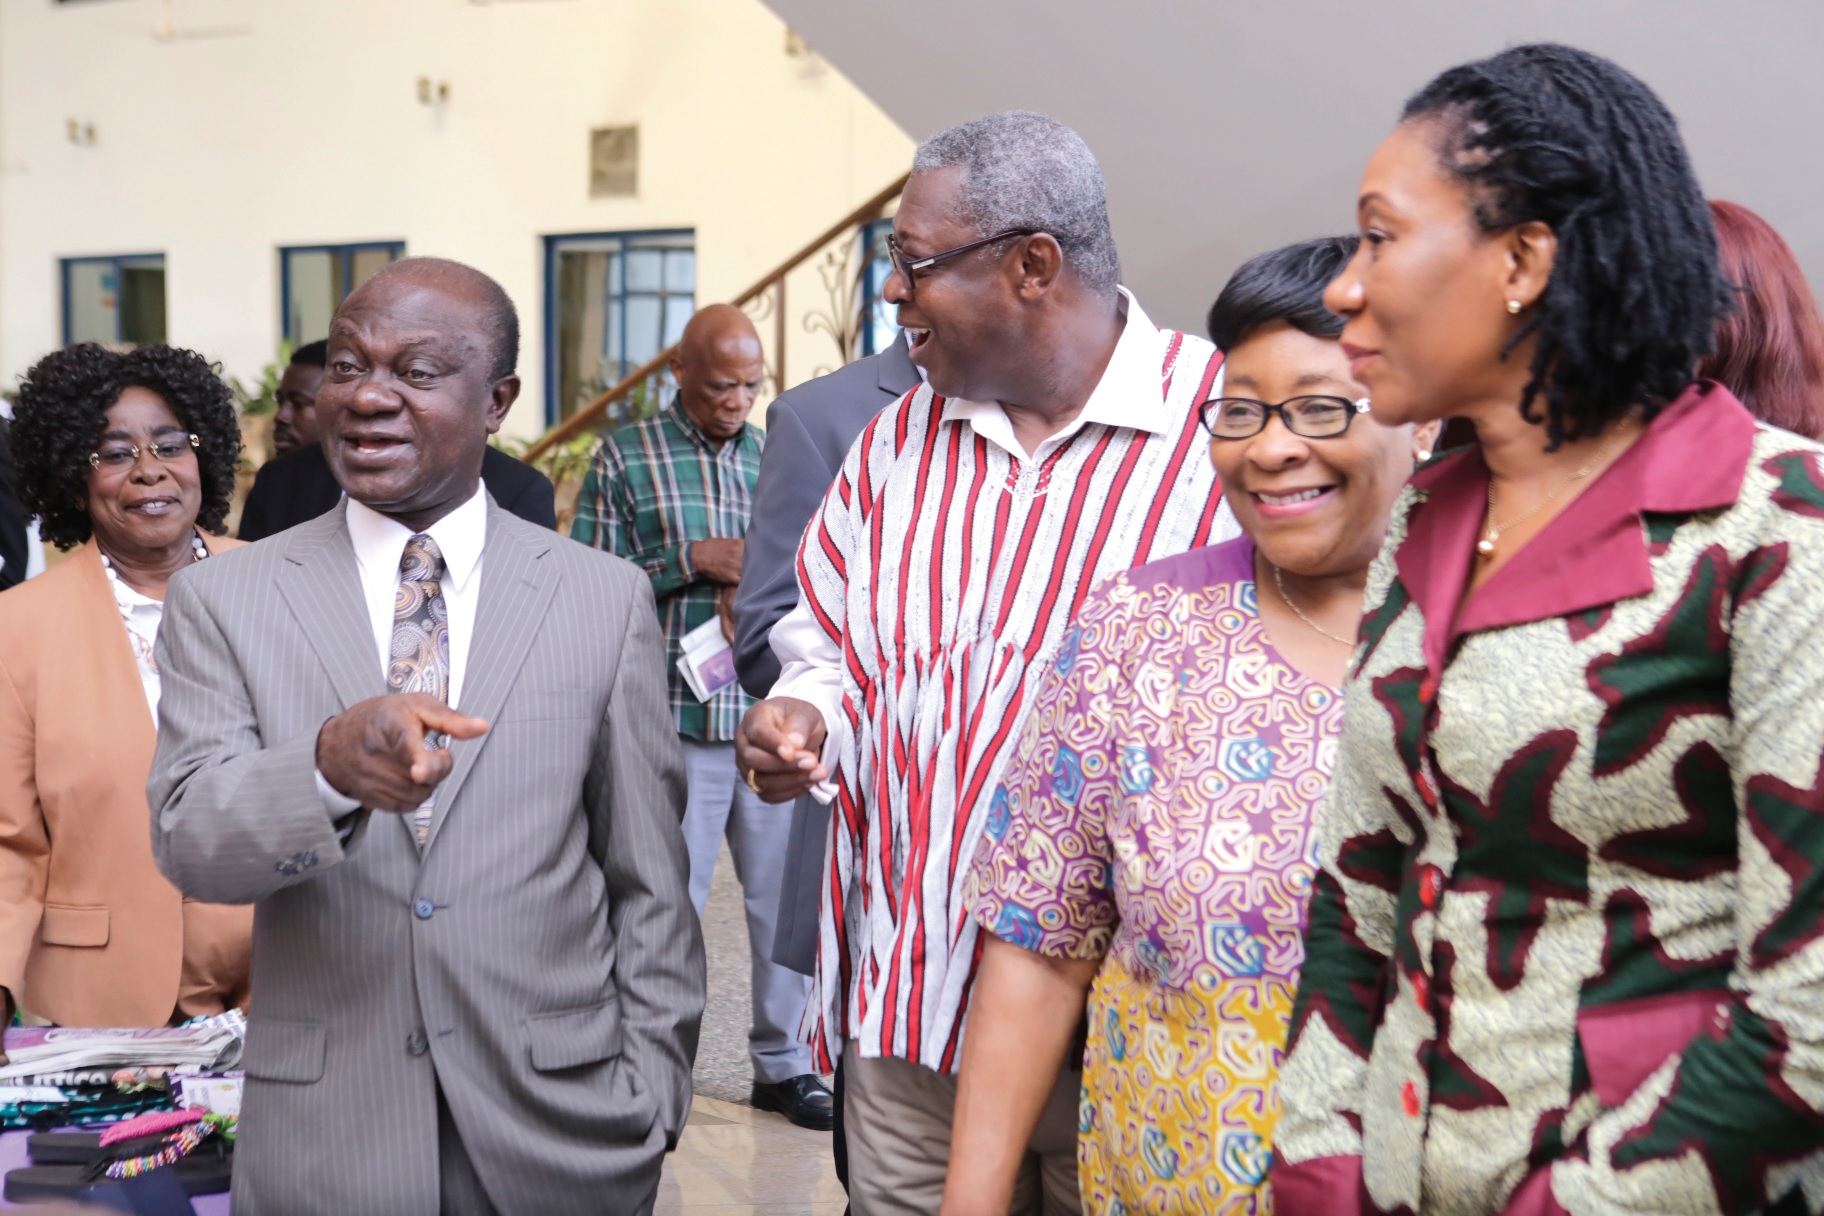 Prof. George Gyan Baffour (left), Minister of Planning, interacting with Prof. Agyemang Badu Akosa (2nd left), Commissioner, National Development Planning Commission and other dignitaries at the launch. 